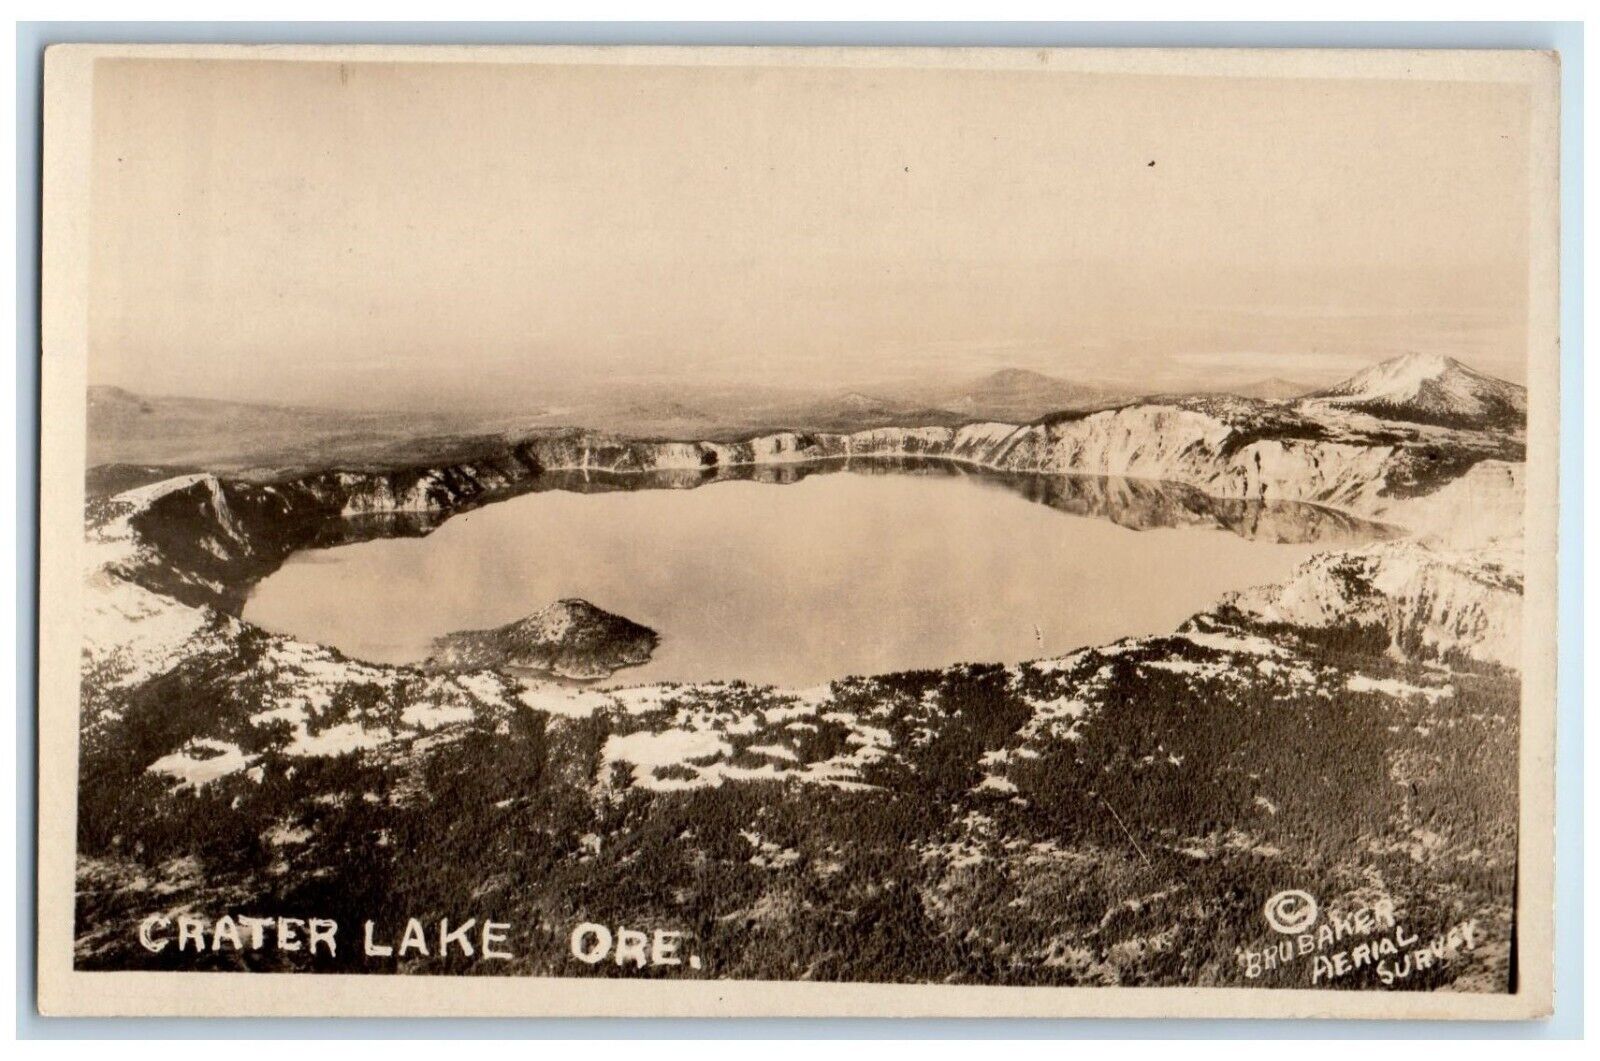 c1940s View Of Crater Lake Oregon OR, Brubaker Aerial Survey RPPC Photo Postcard